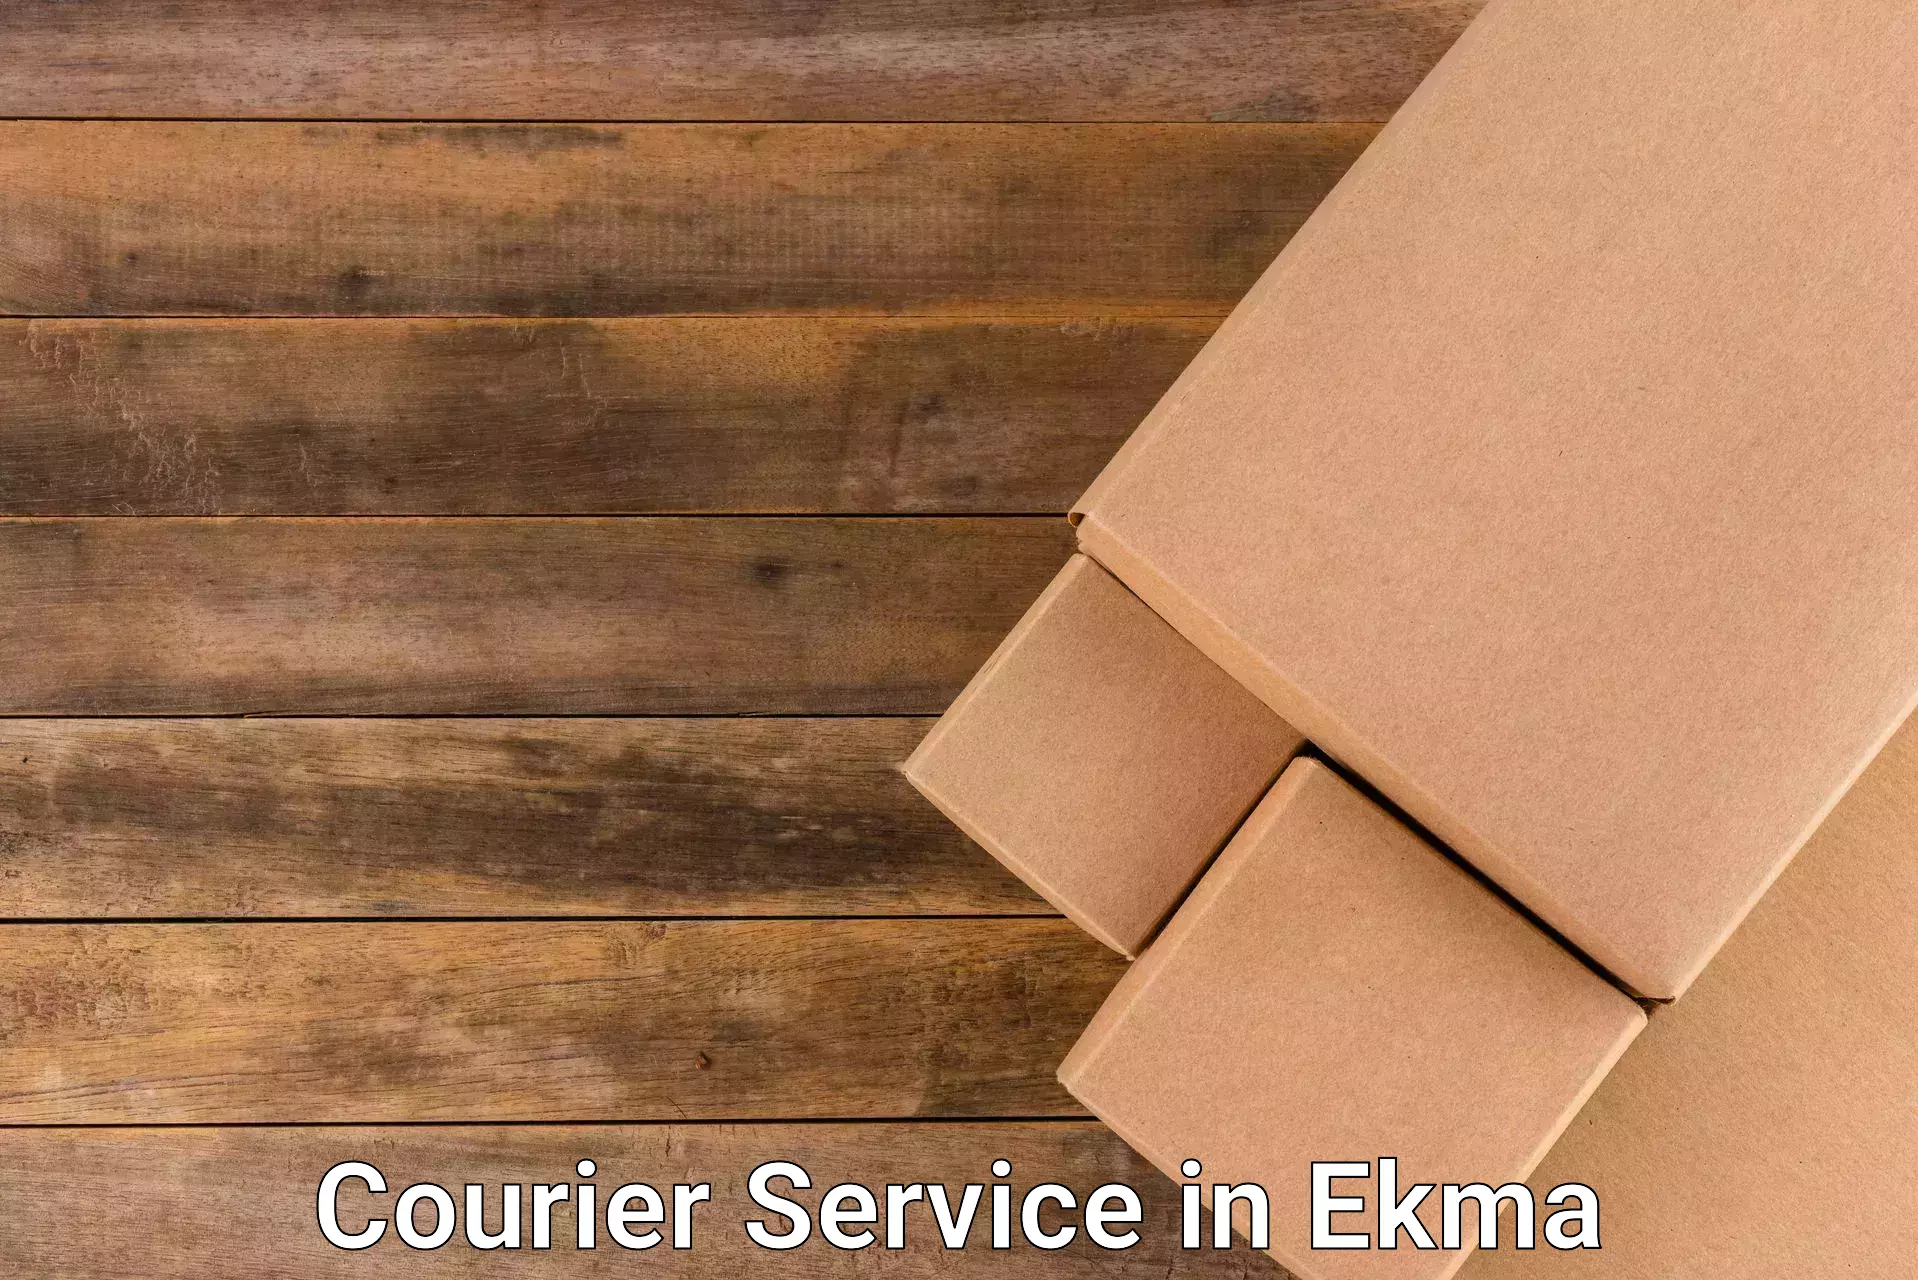 Comprehensive parcel tracking in Ekma